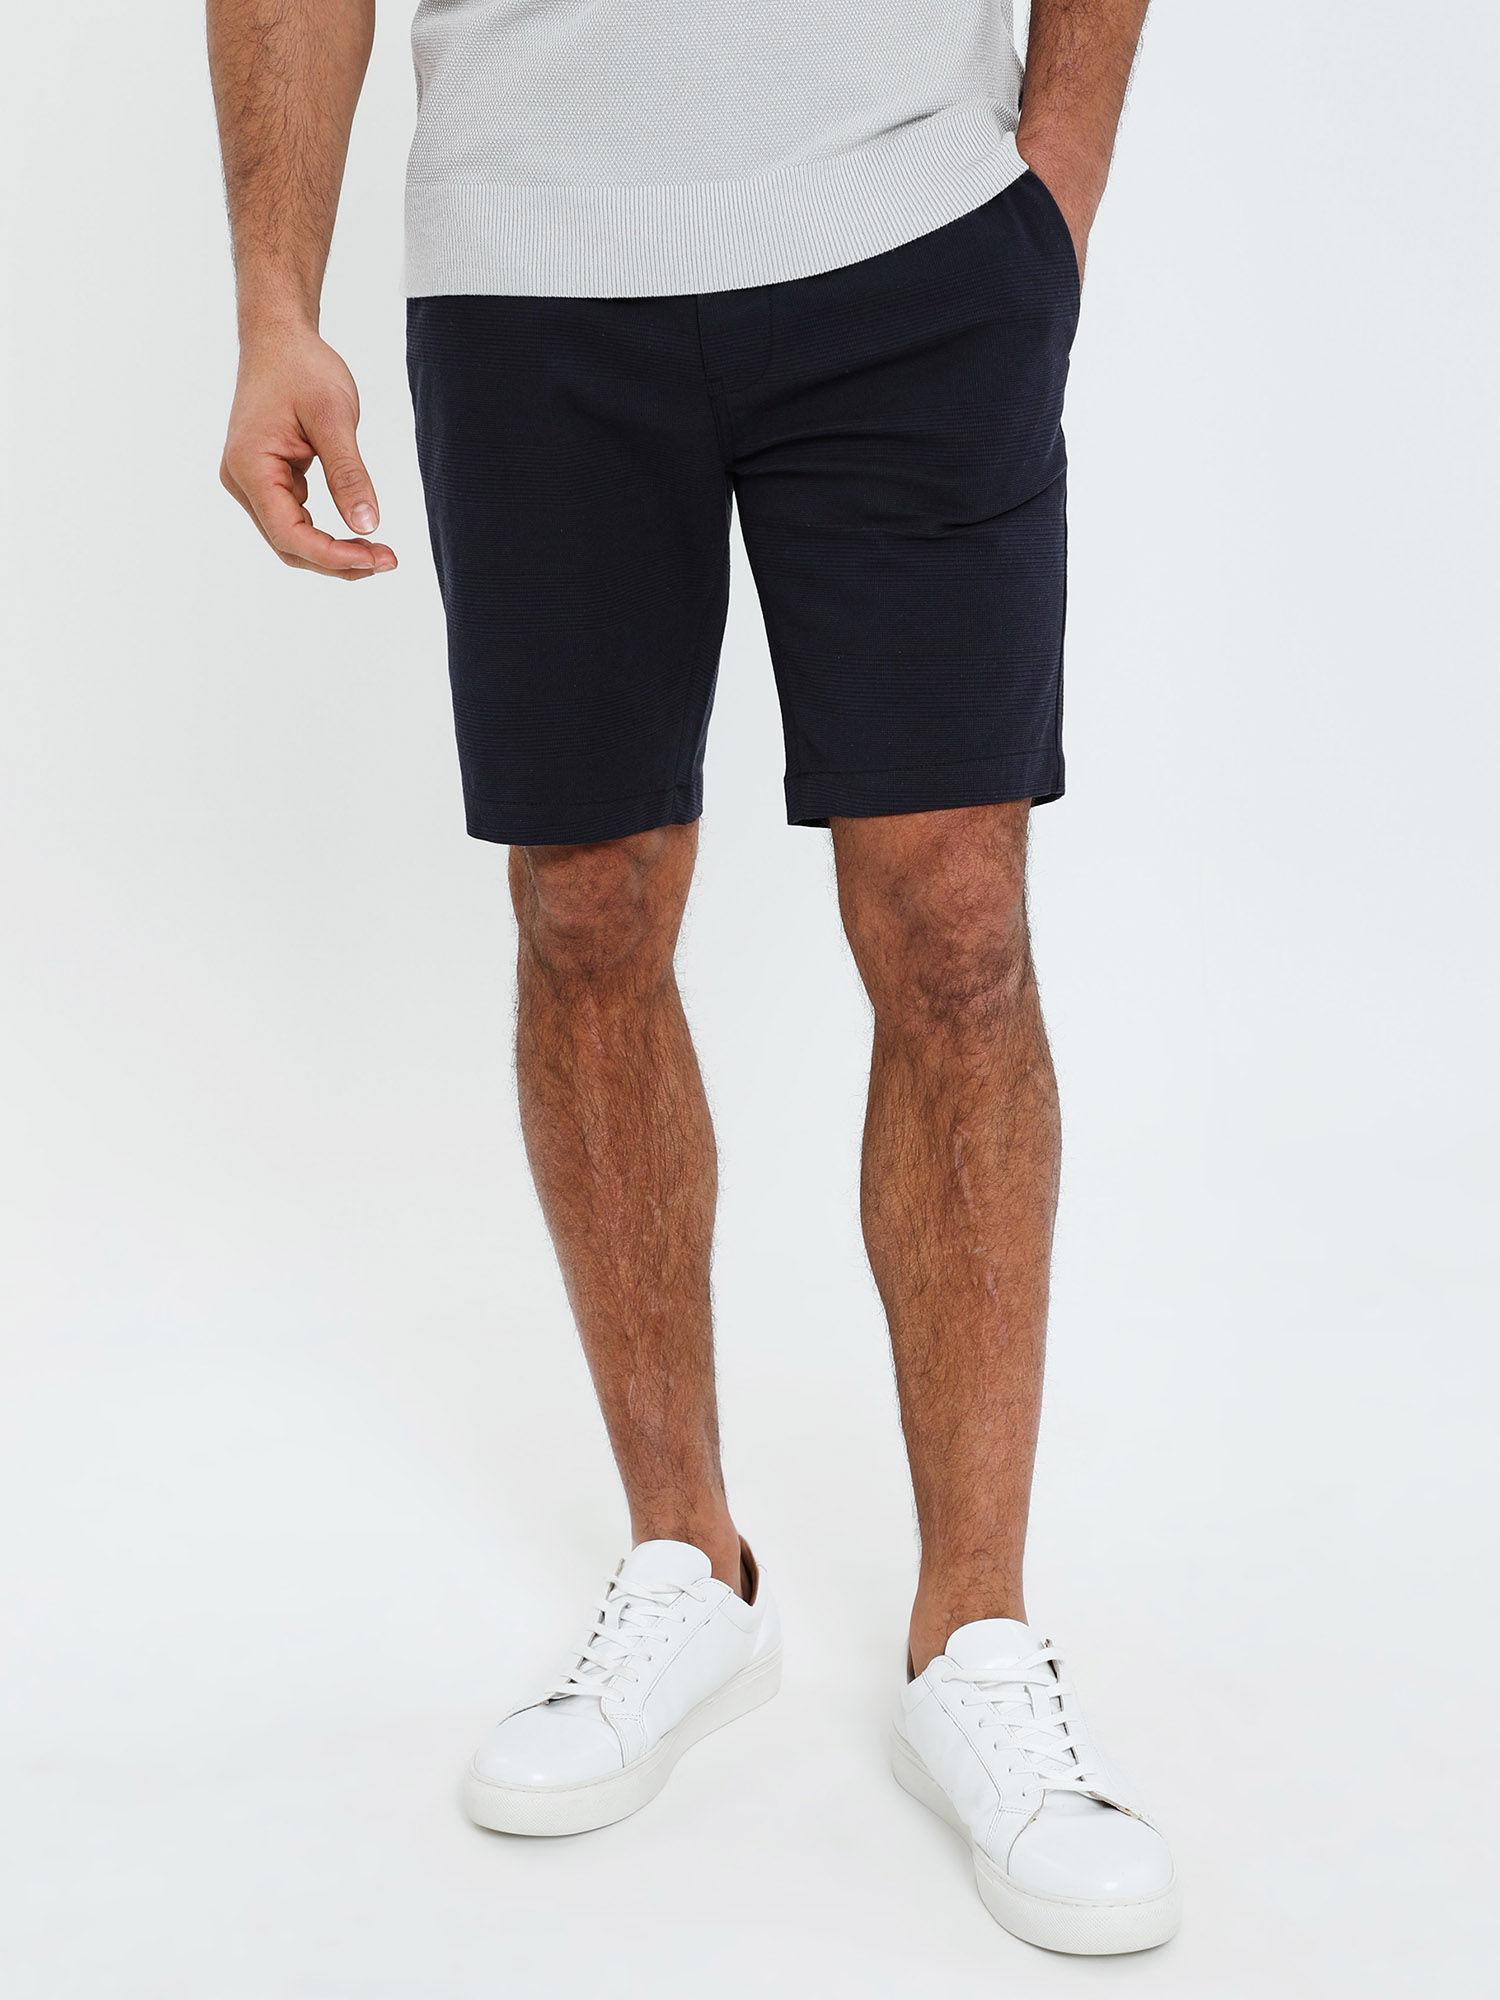 luxe-men-navy-check-slim-fit-chino-shorts